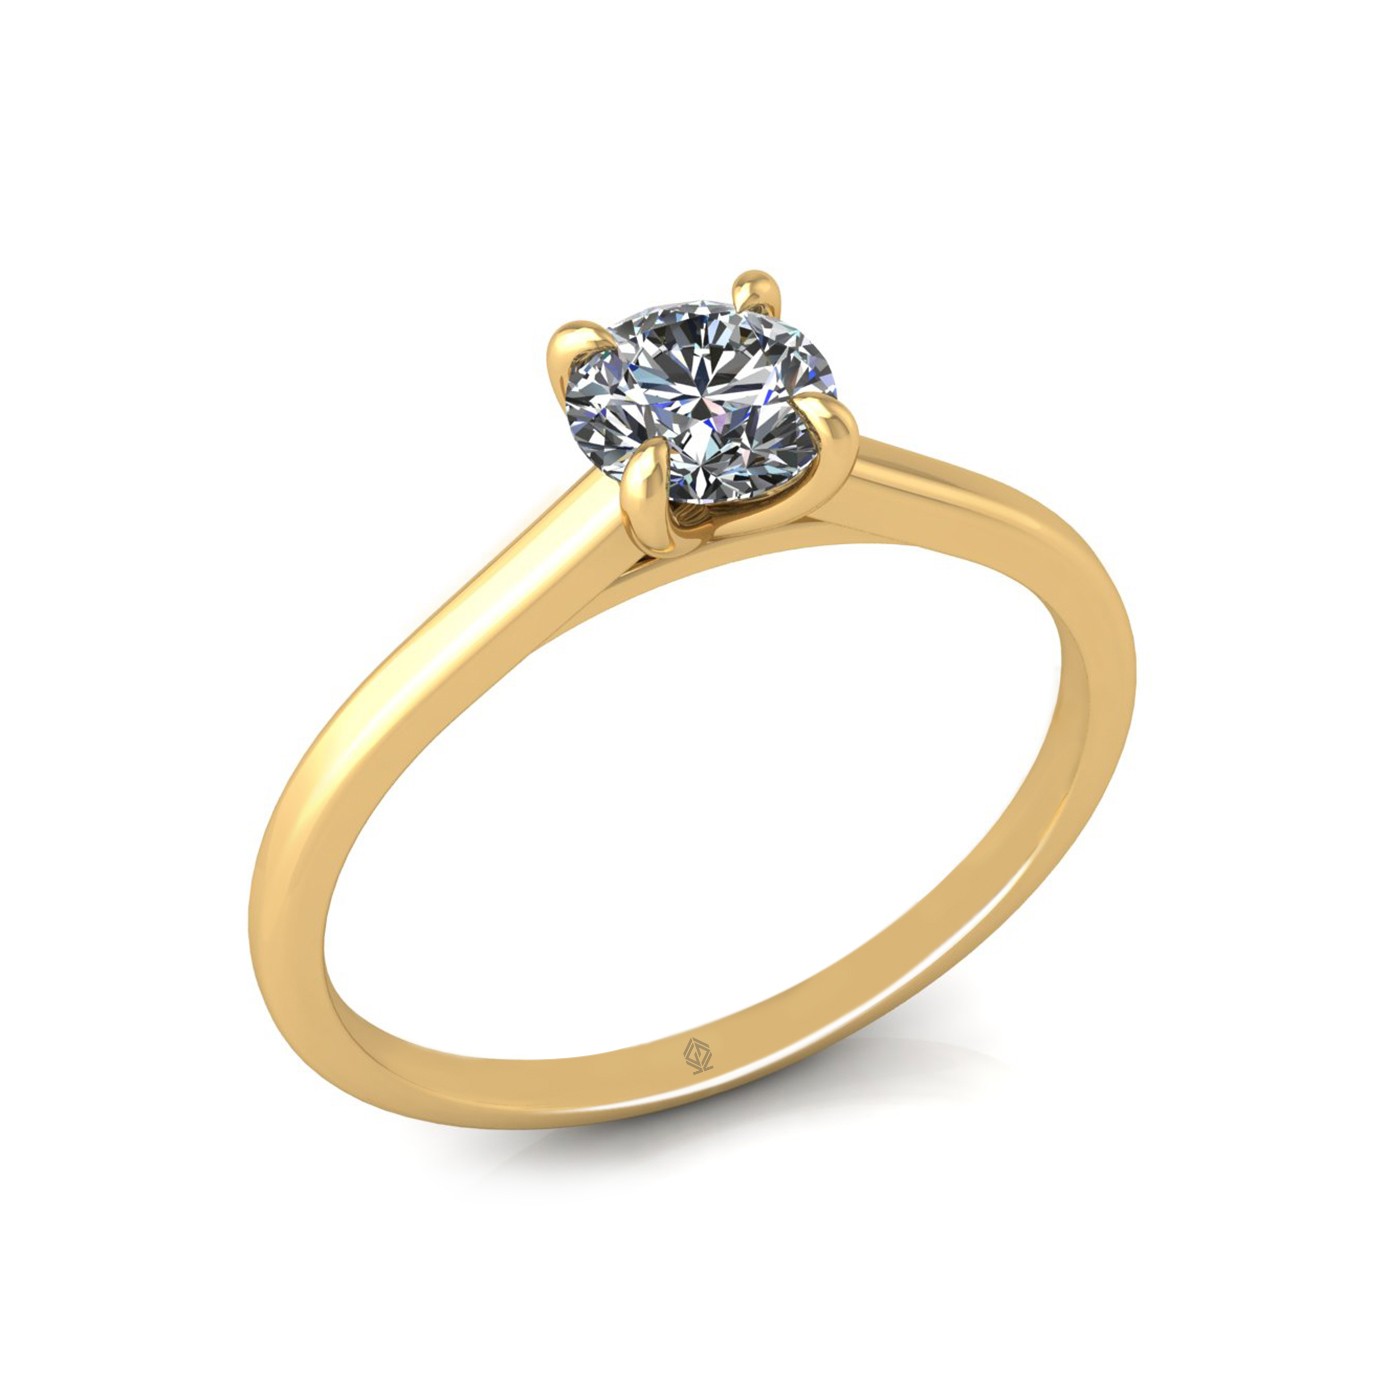 18k yellow gold 0,50 ct 4 prongs solitaire round cut diamond engagement ring with whisper thin band